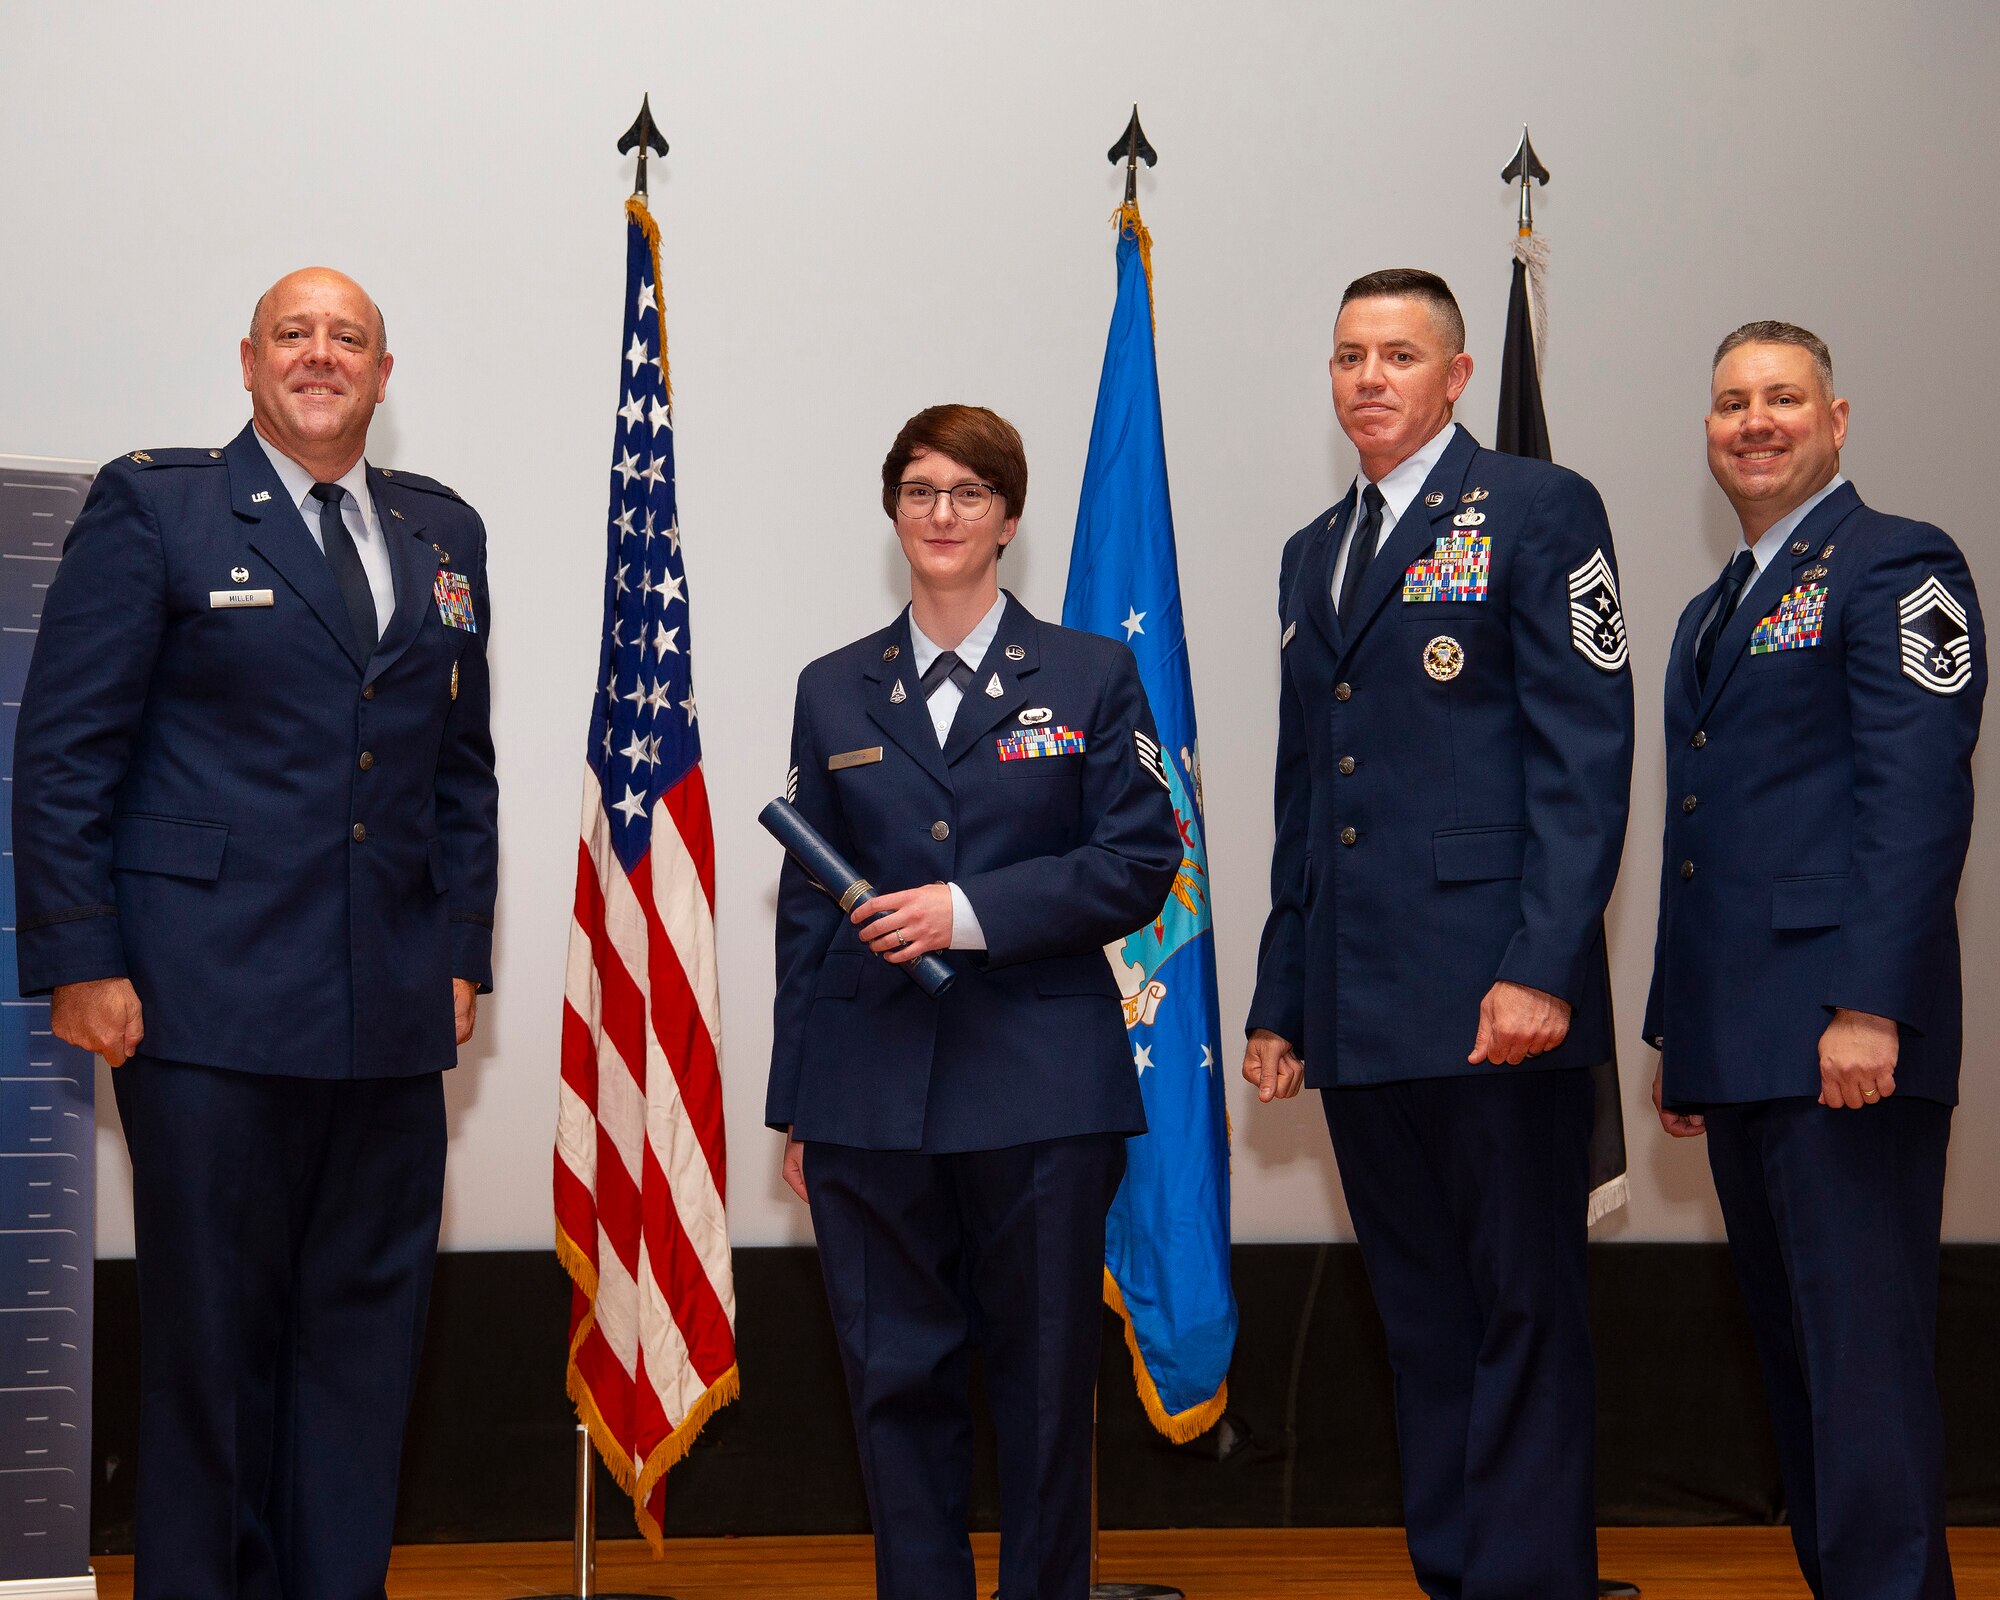 U.S. Space Force Sgt. Donna Farris, 73rd Intelligence, Surveillance and Reconnaissance Squadron, poses with (from left) Air Force Col. Patrick Miller, 88th Air Base Wing and installation commander; Chief Master Sgt. Jason Shaffer, 88 ABW command chief; and Chief Master Sgt. Erik Robbins, U.S. Air Force School of Aerospace Medicine’s Occupational and Environmental Health Division superintendent, as she receives her diploma May 26, 2021, during the Community College of the Air Force spring graduation ceremony in the theater at Wright-Patterson Air Force Base, Ohio. Farris was one of 57 Airmen and Guardians who earned degrees. (U.S. Air Force photo by R.J. Oriez)